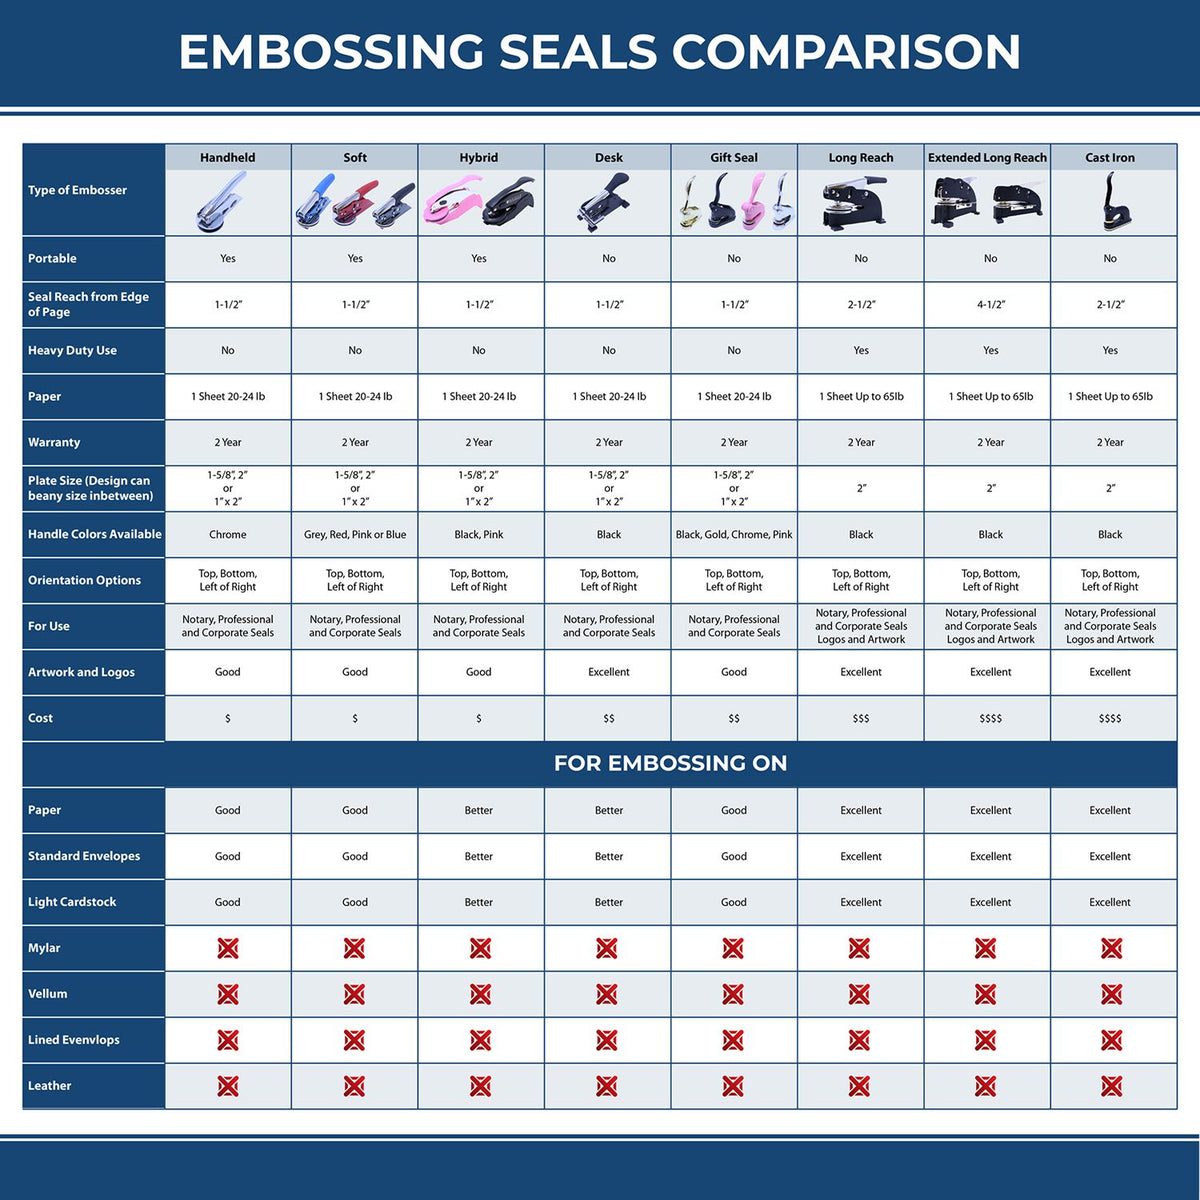 A comparison chart for the different types of mount models available for the Soft New York Professional Geologist Seal